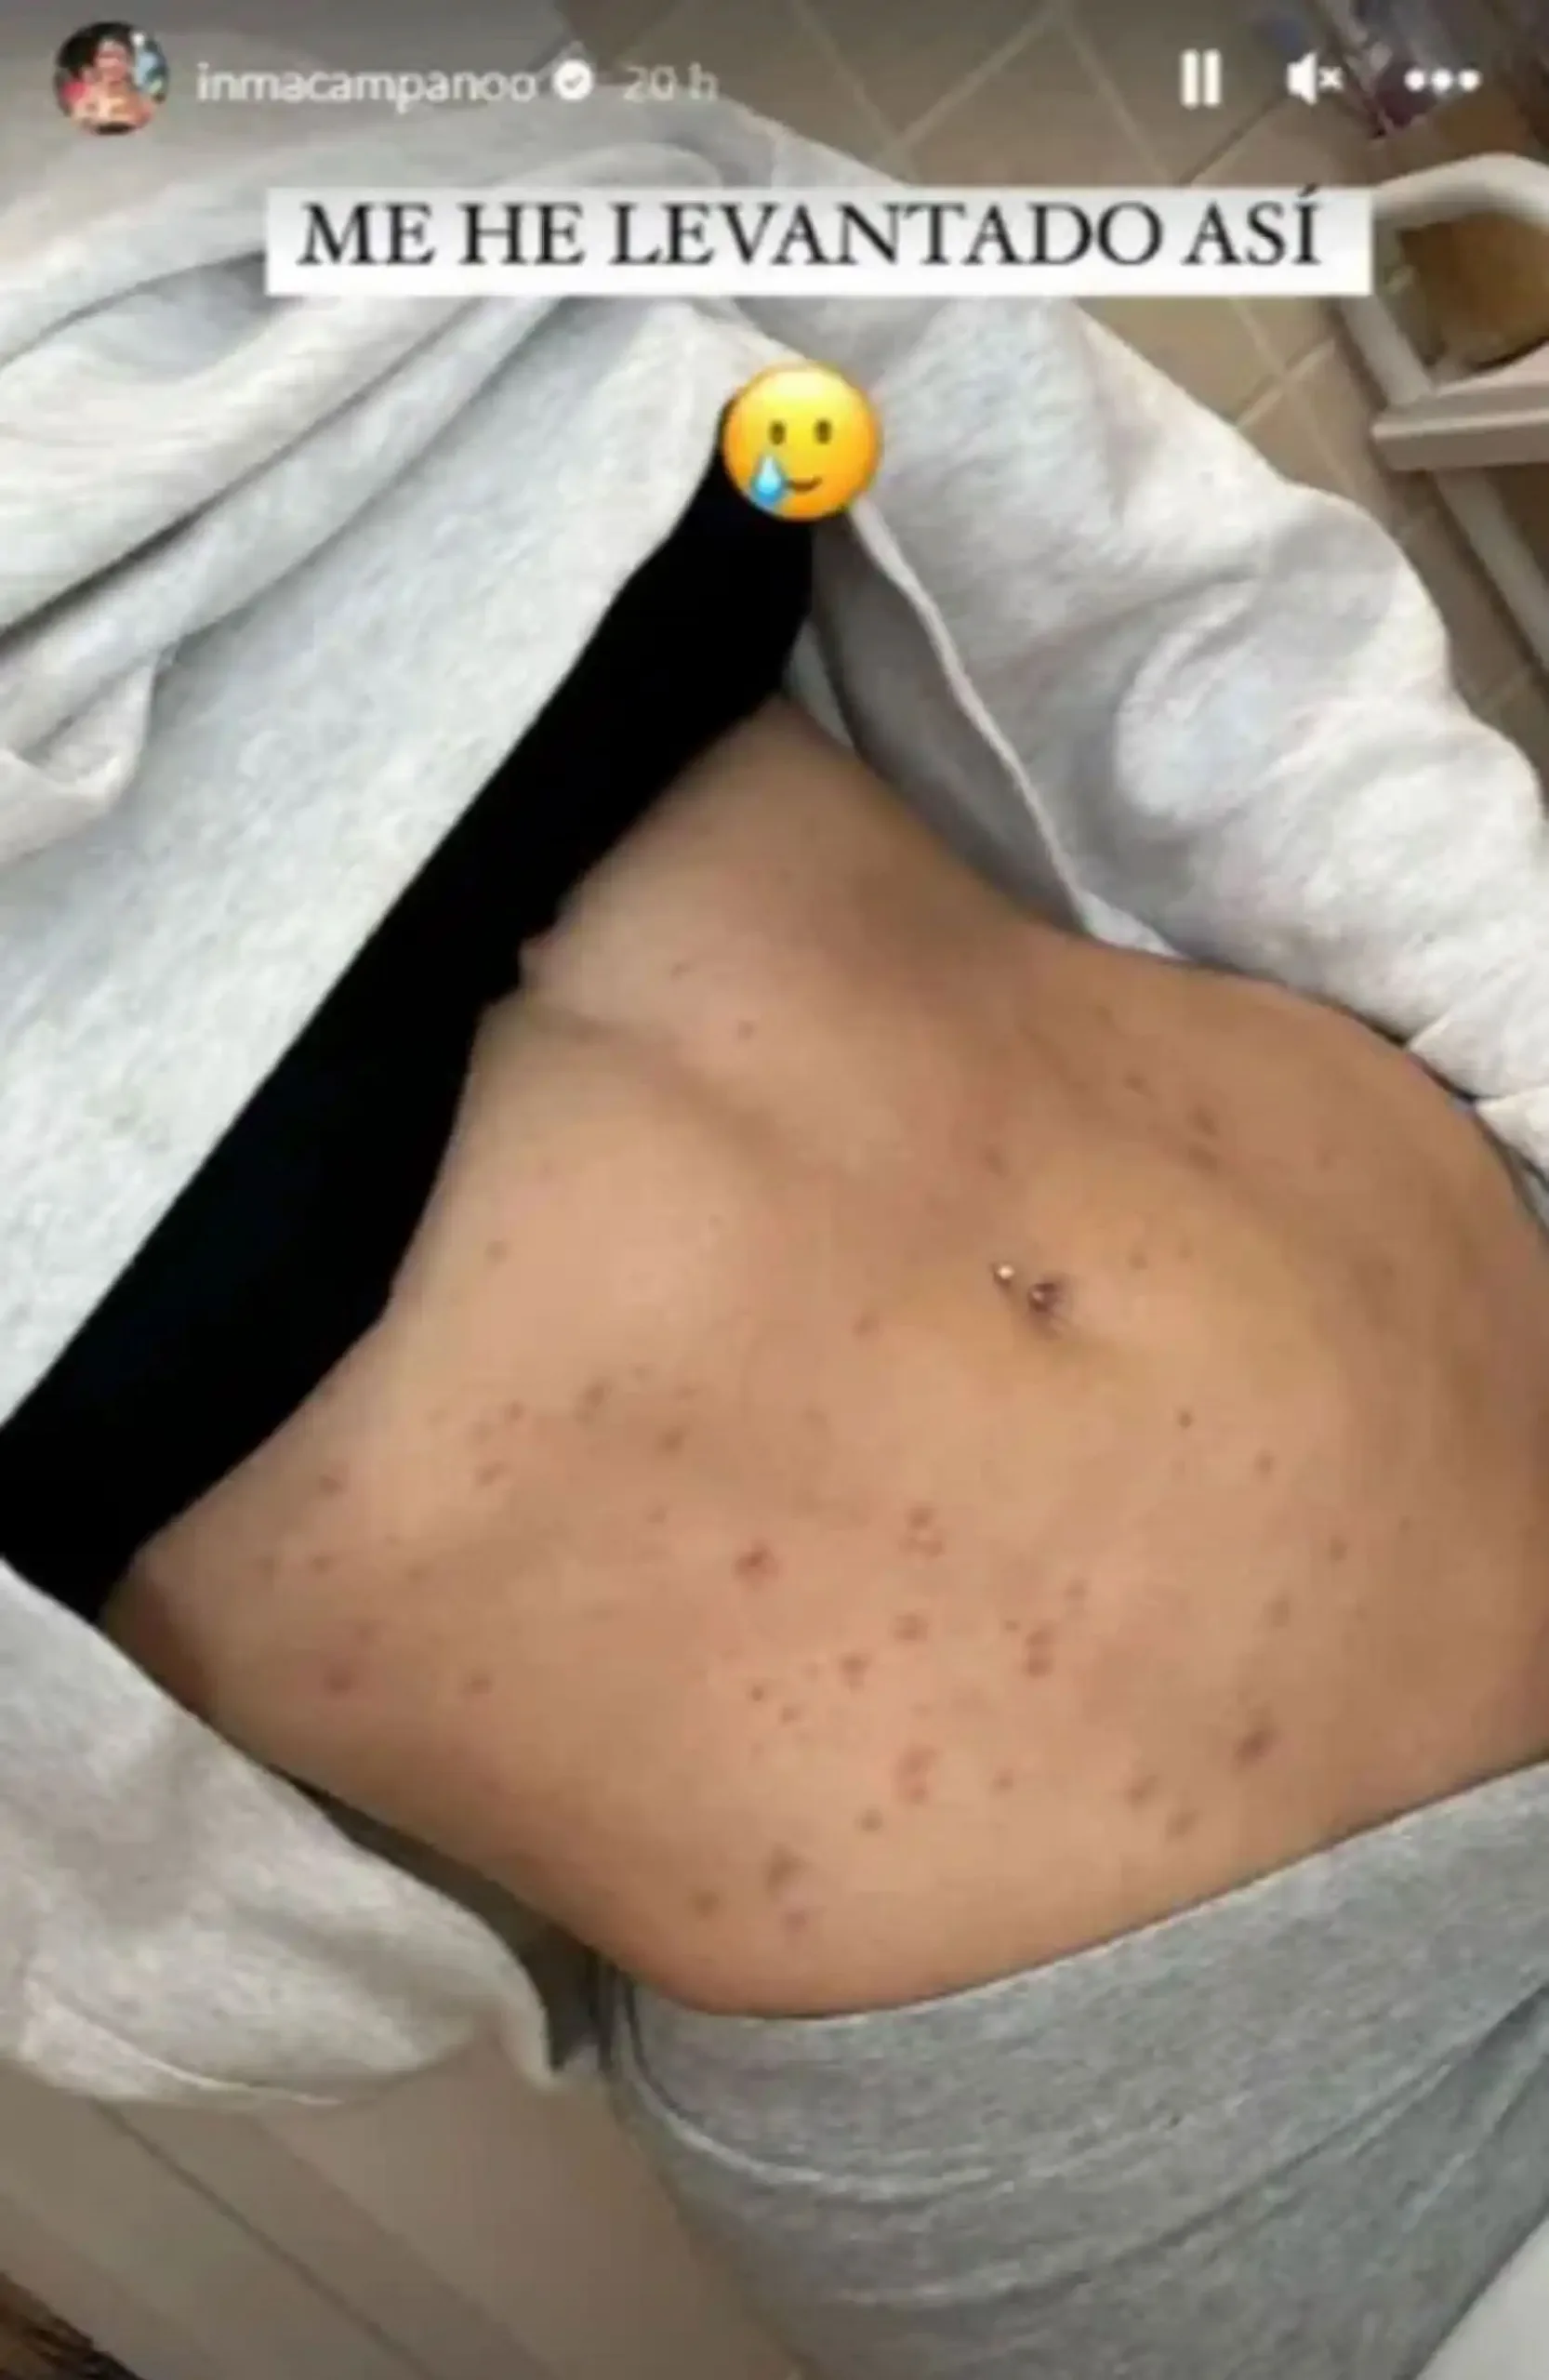 the influencer Inma Campano's showing her belly rash, after getting influenza A, scarlet fever and scabies at same time